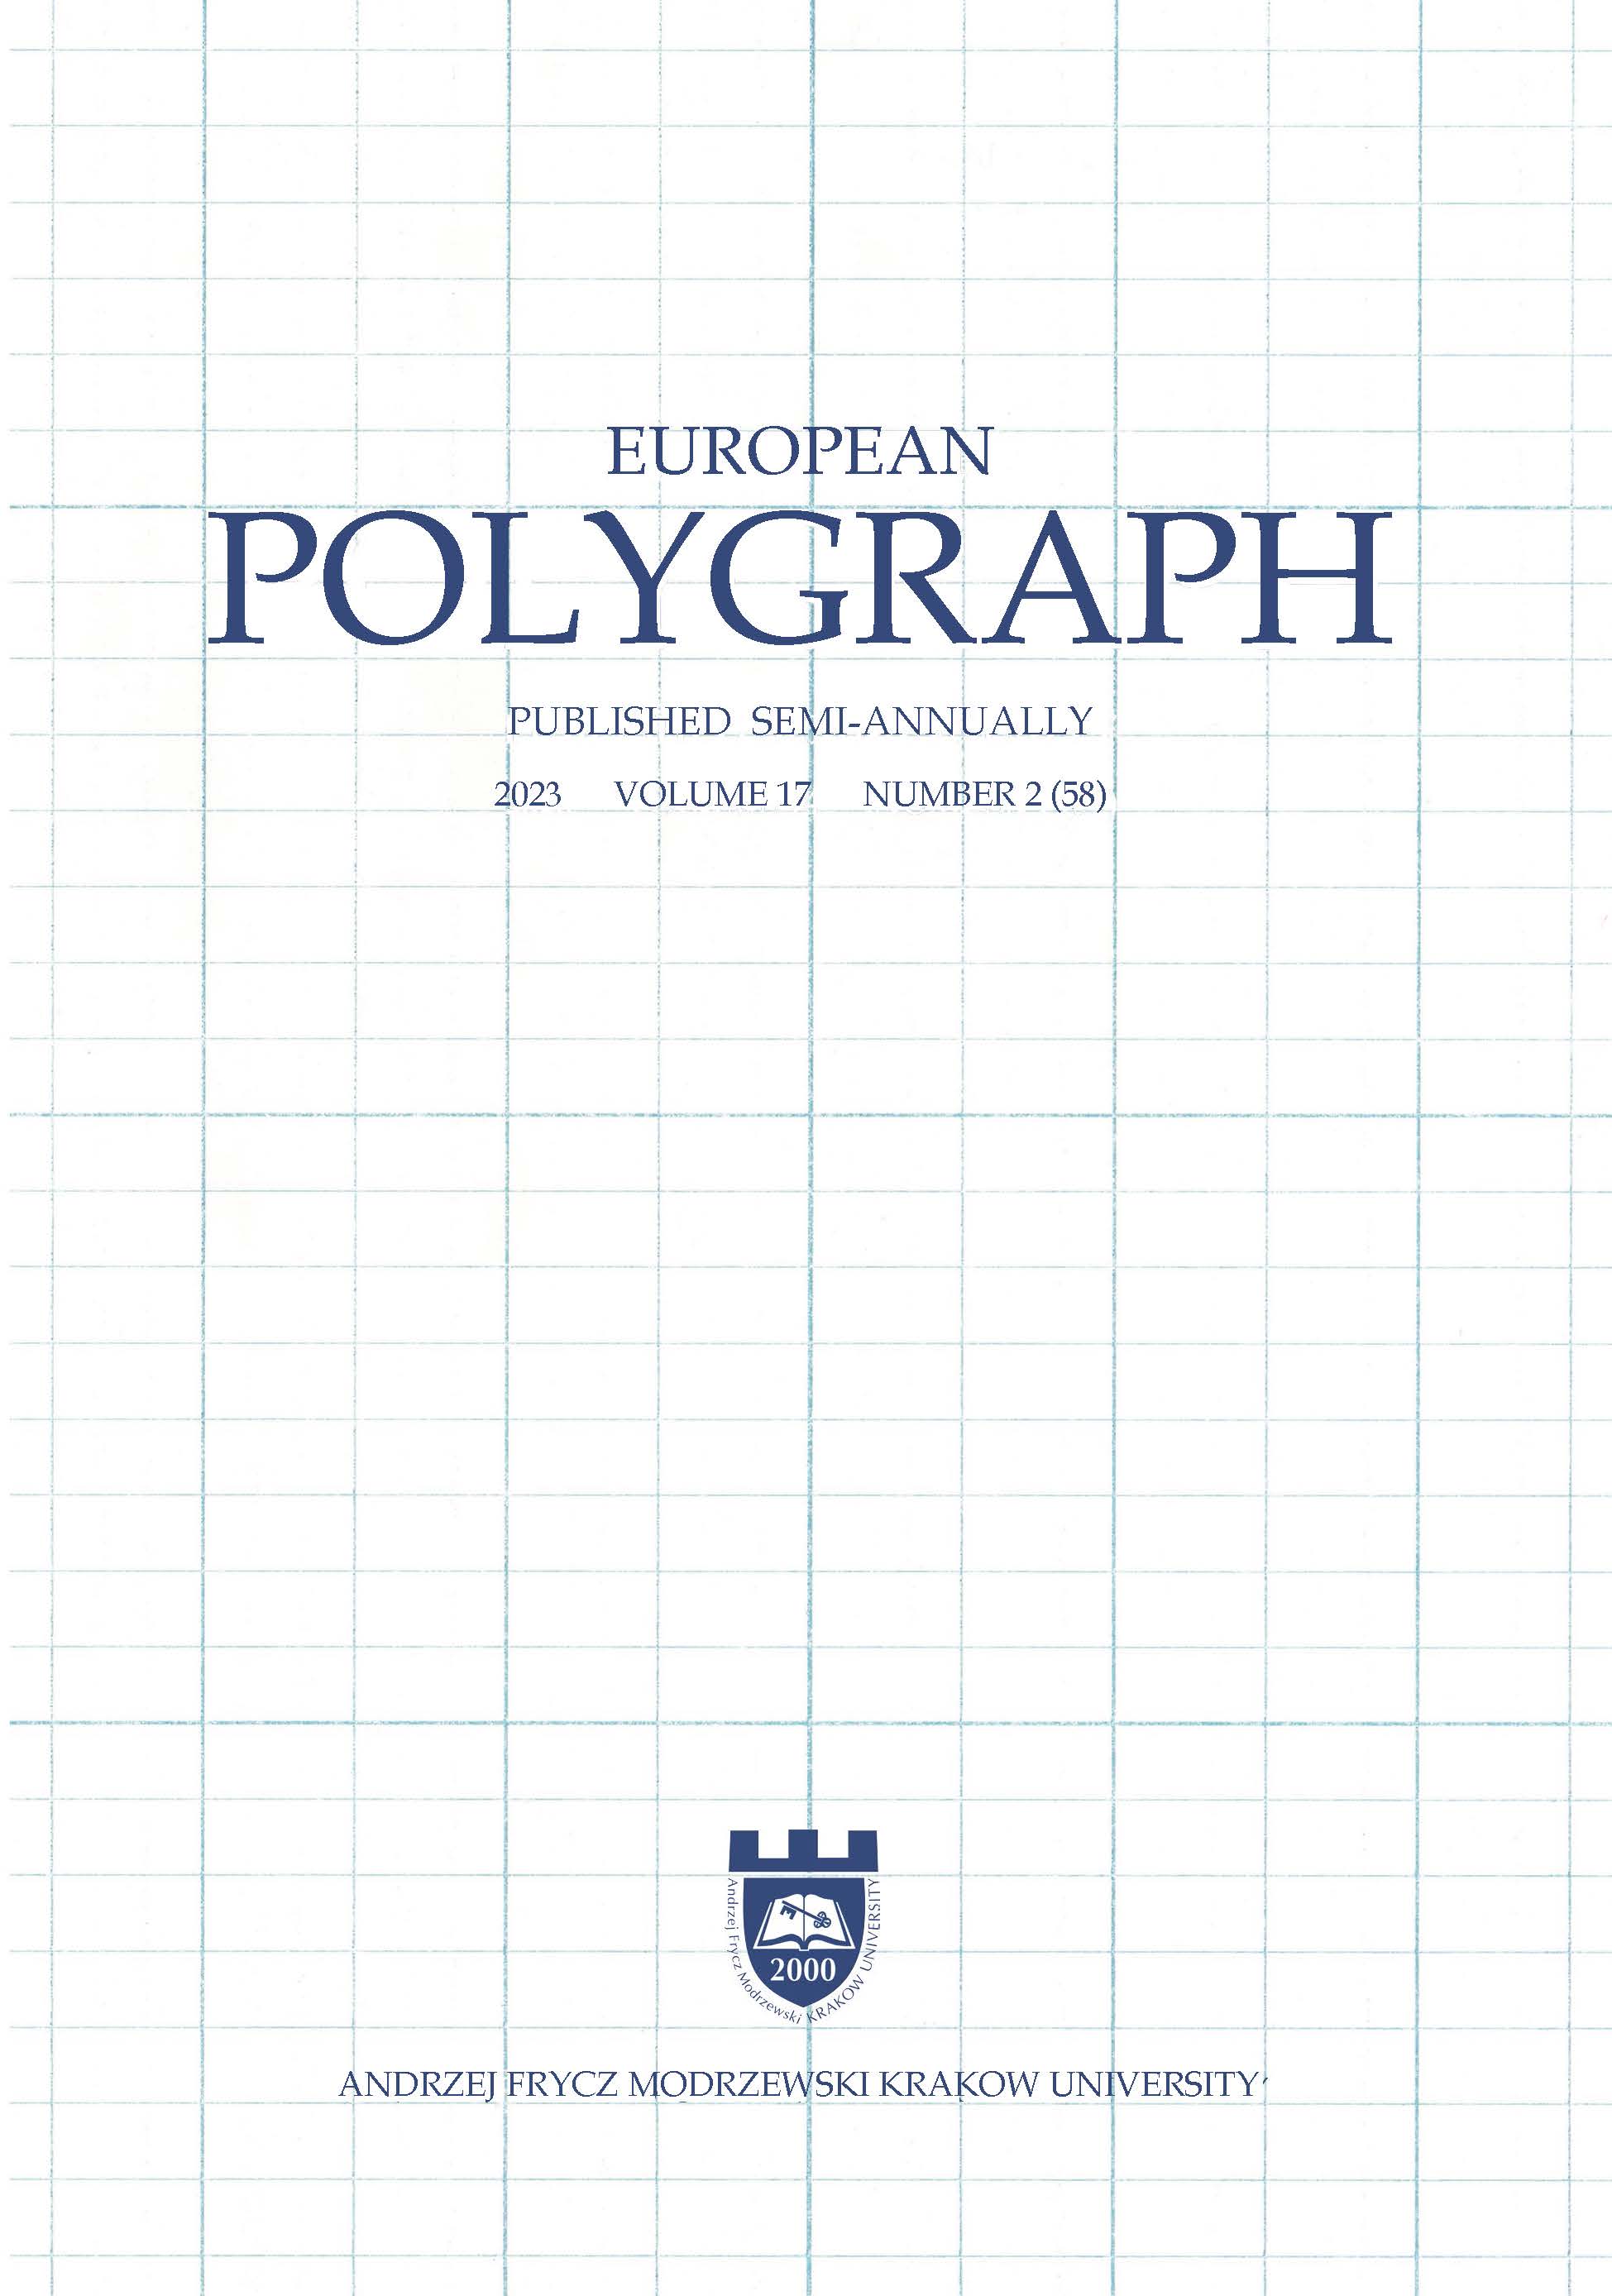 History of Polygraph Examination Cover Image